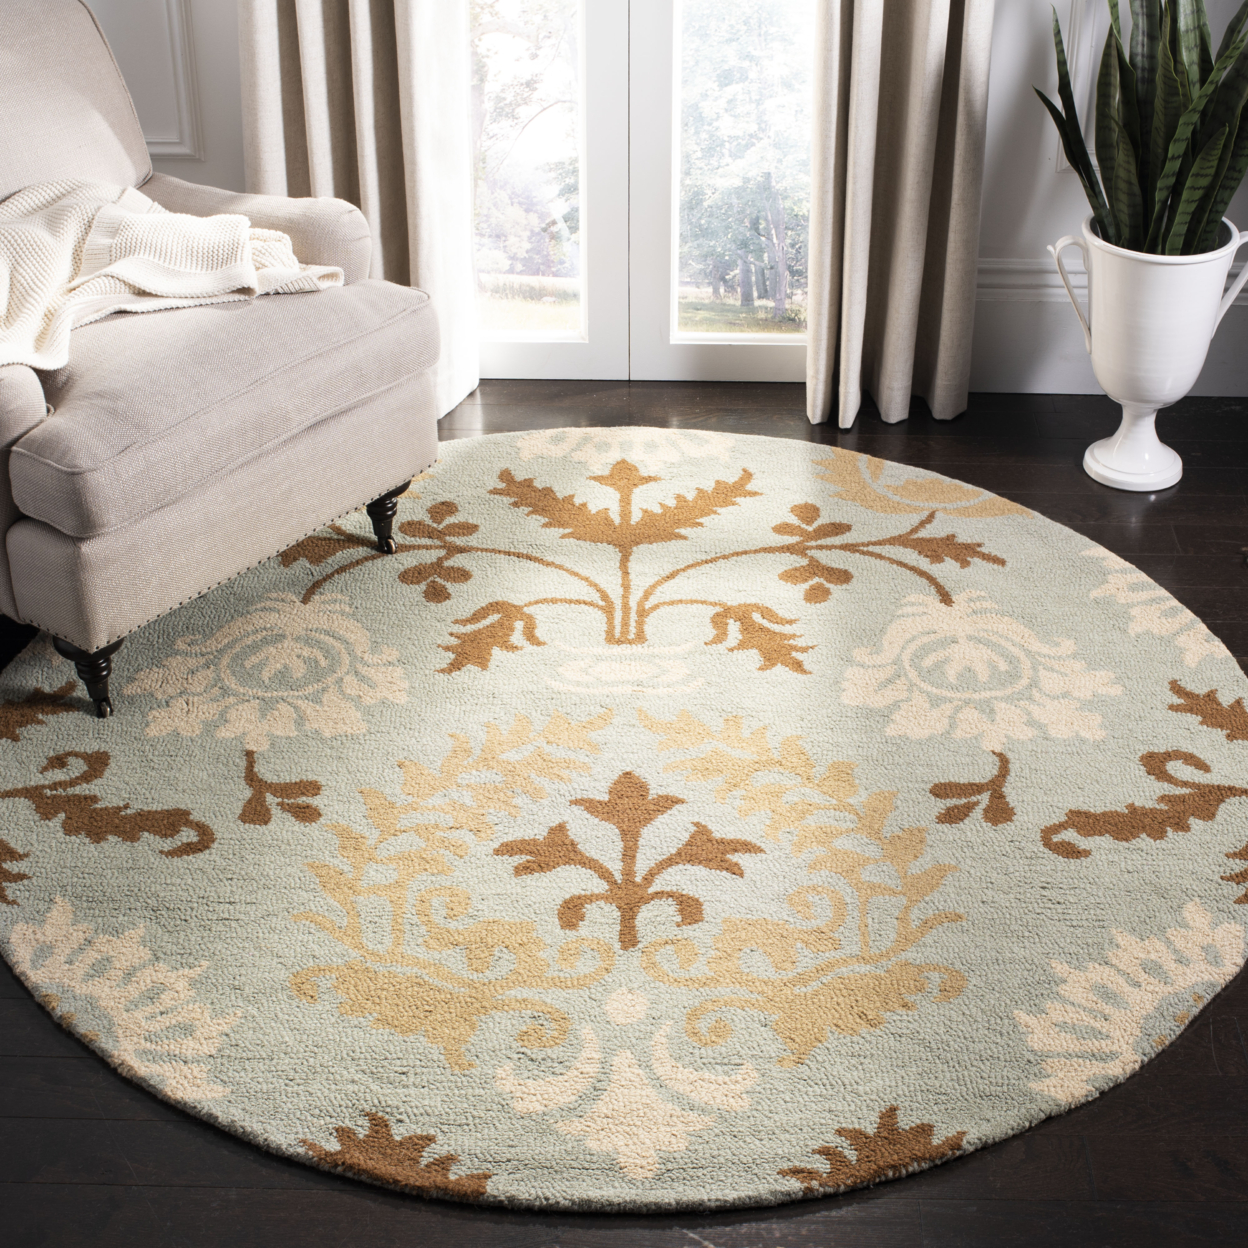 SAFAVIEH Blossom BLM787A Hand-hooked Blue / Multi Rug - 6' Round